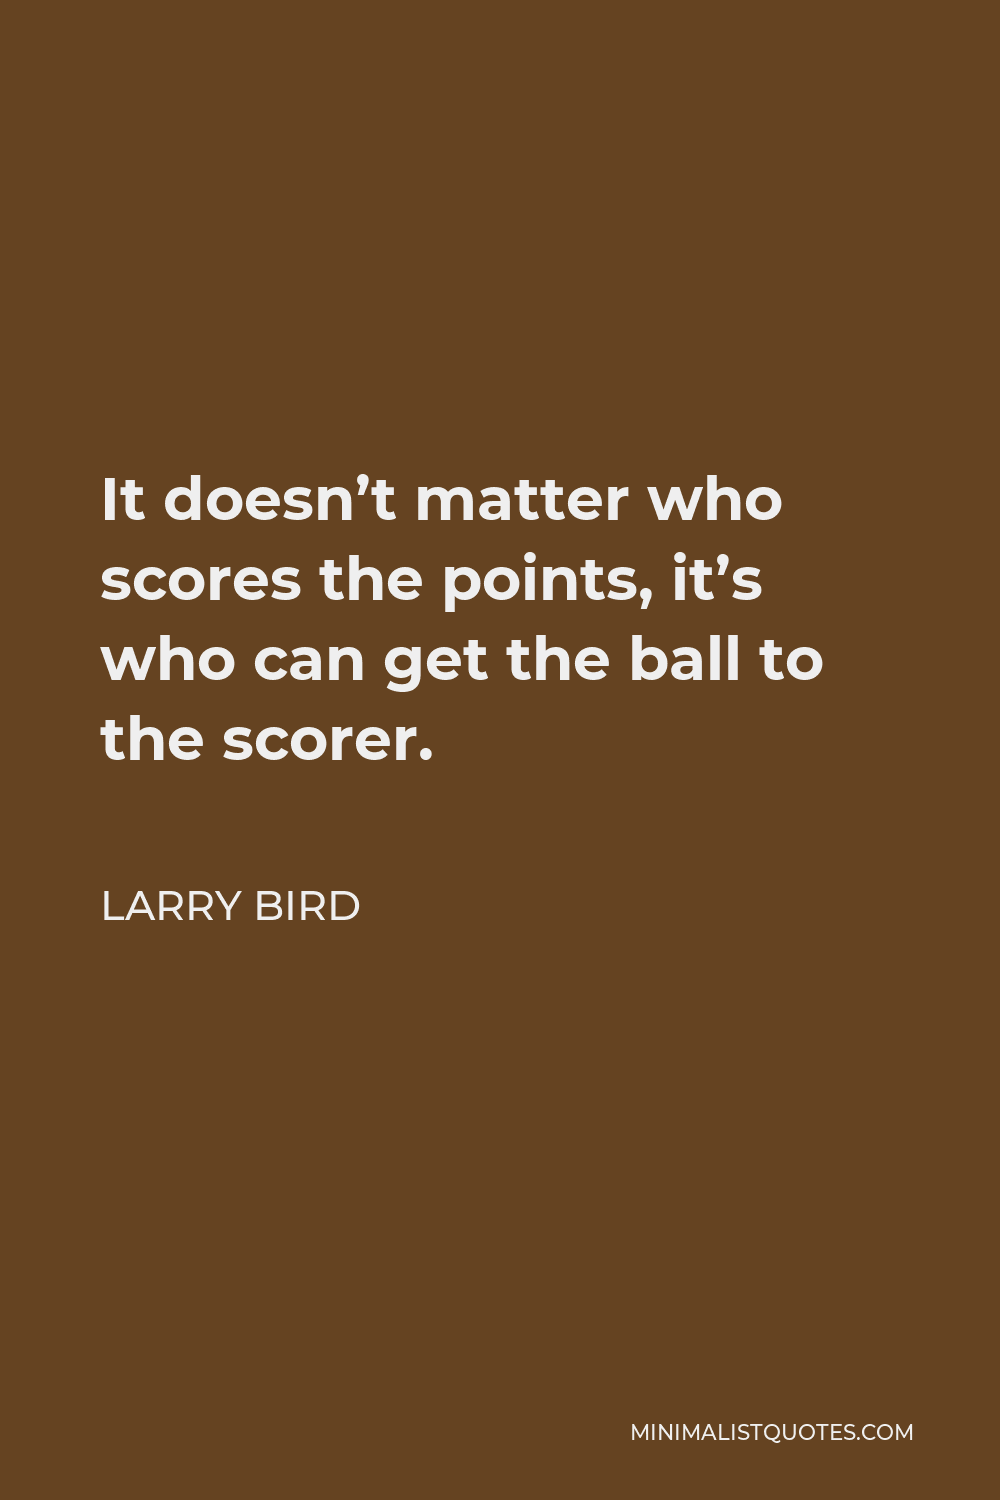 Larry Bird Quote - It doesn’t matter who scores the points, it’s who can get the ball to the scorer.